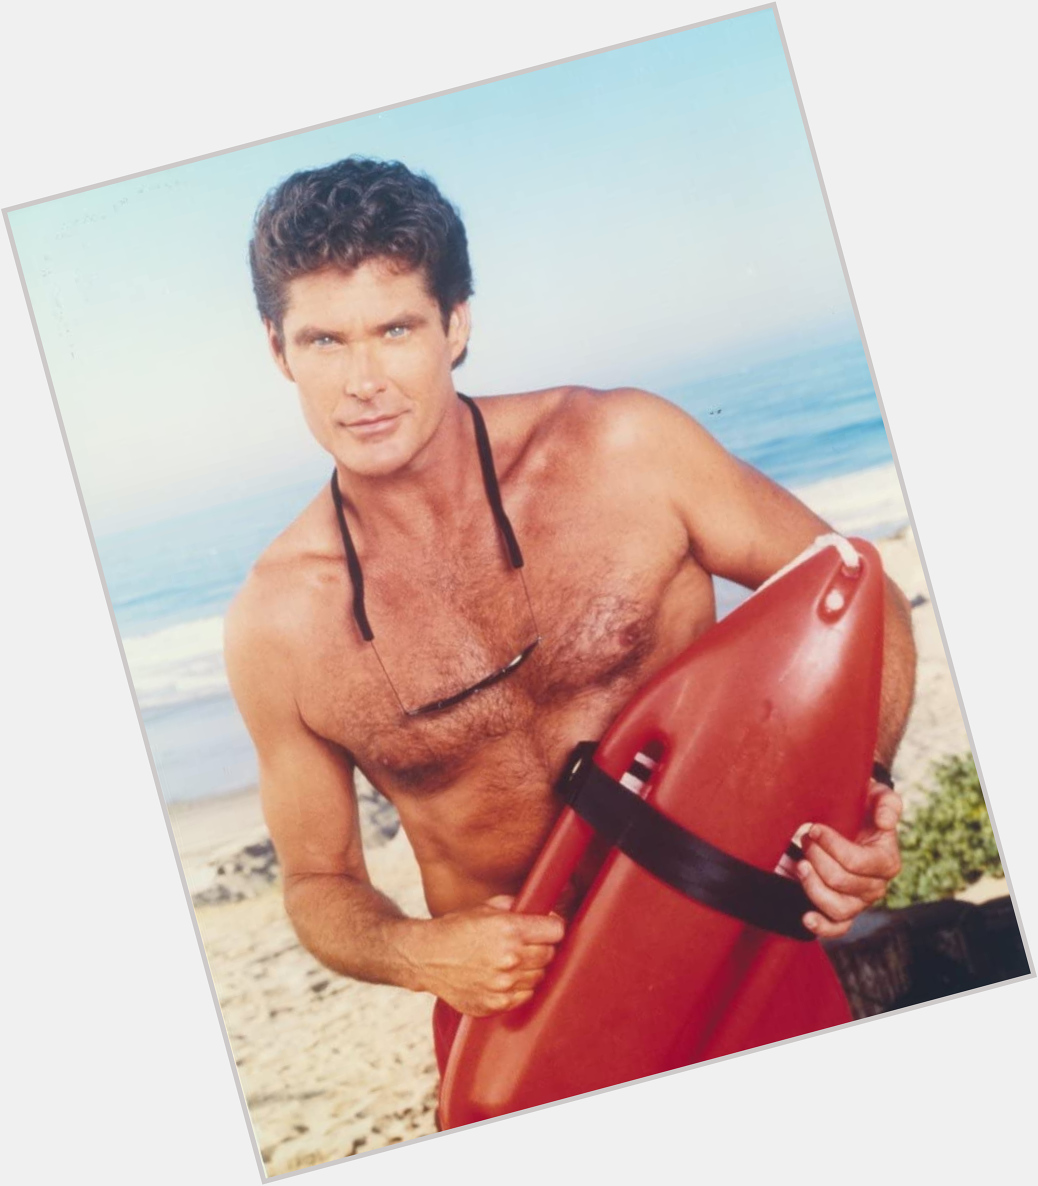 Happy 68th birthday to David Hasselhoff!! What comes to mind when you think of David? 